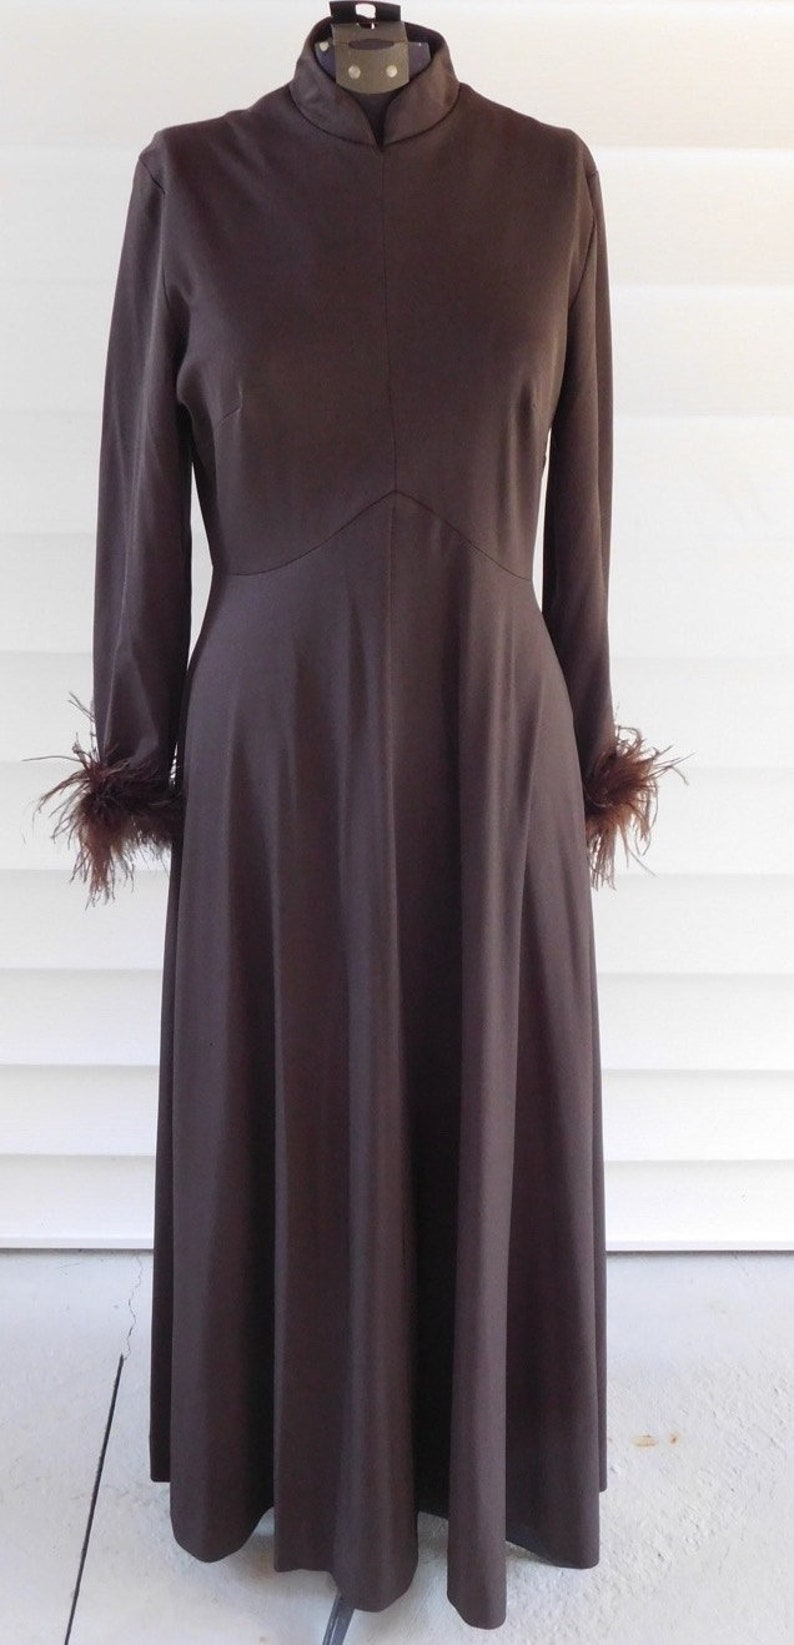 Vintage 1970s Maxi Dress with Feather Cuffs Chocolate Brown Vintage Loungewear image 1